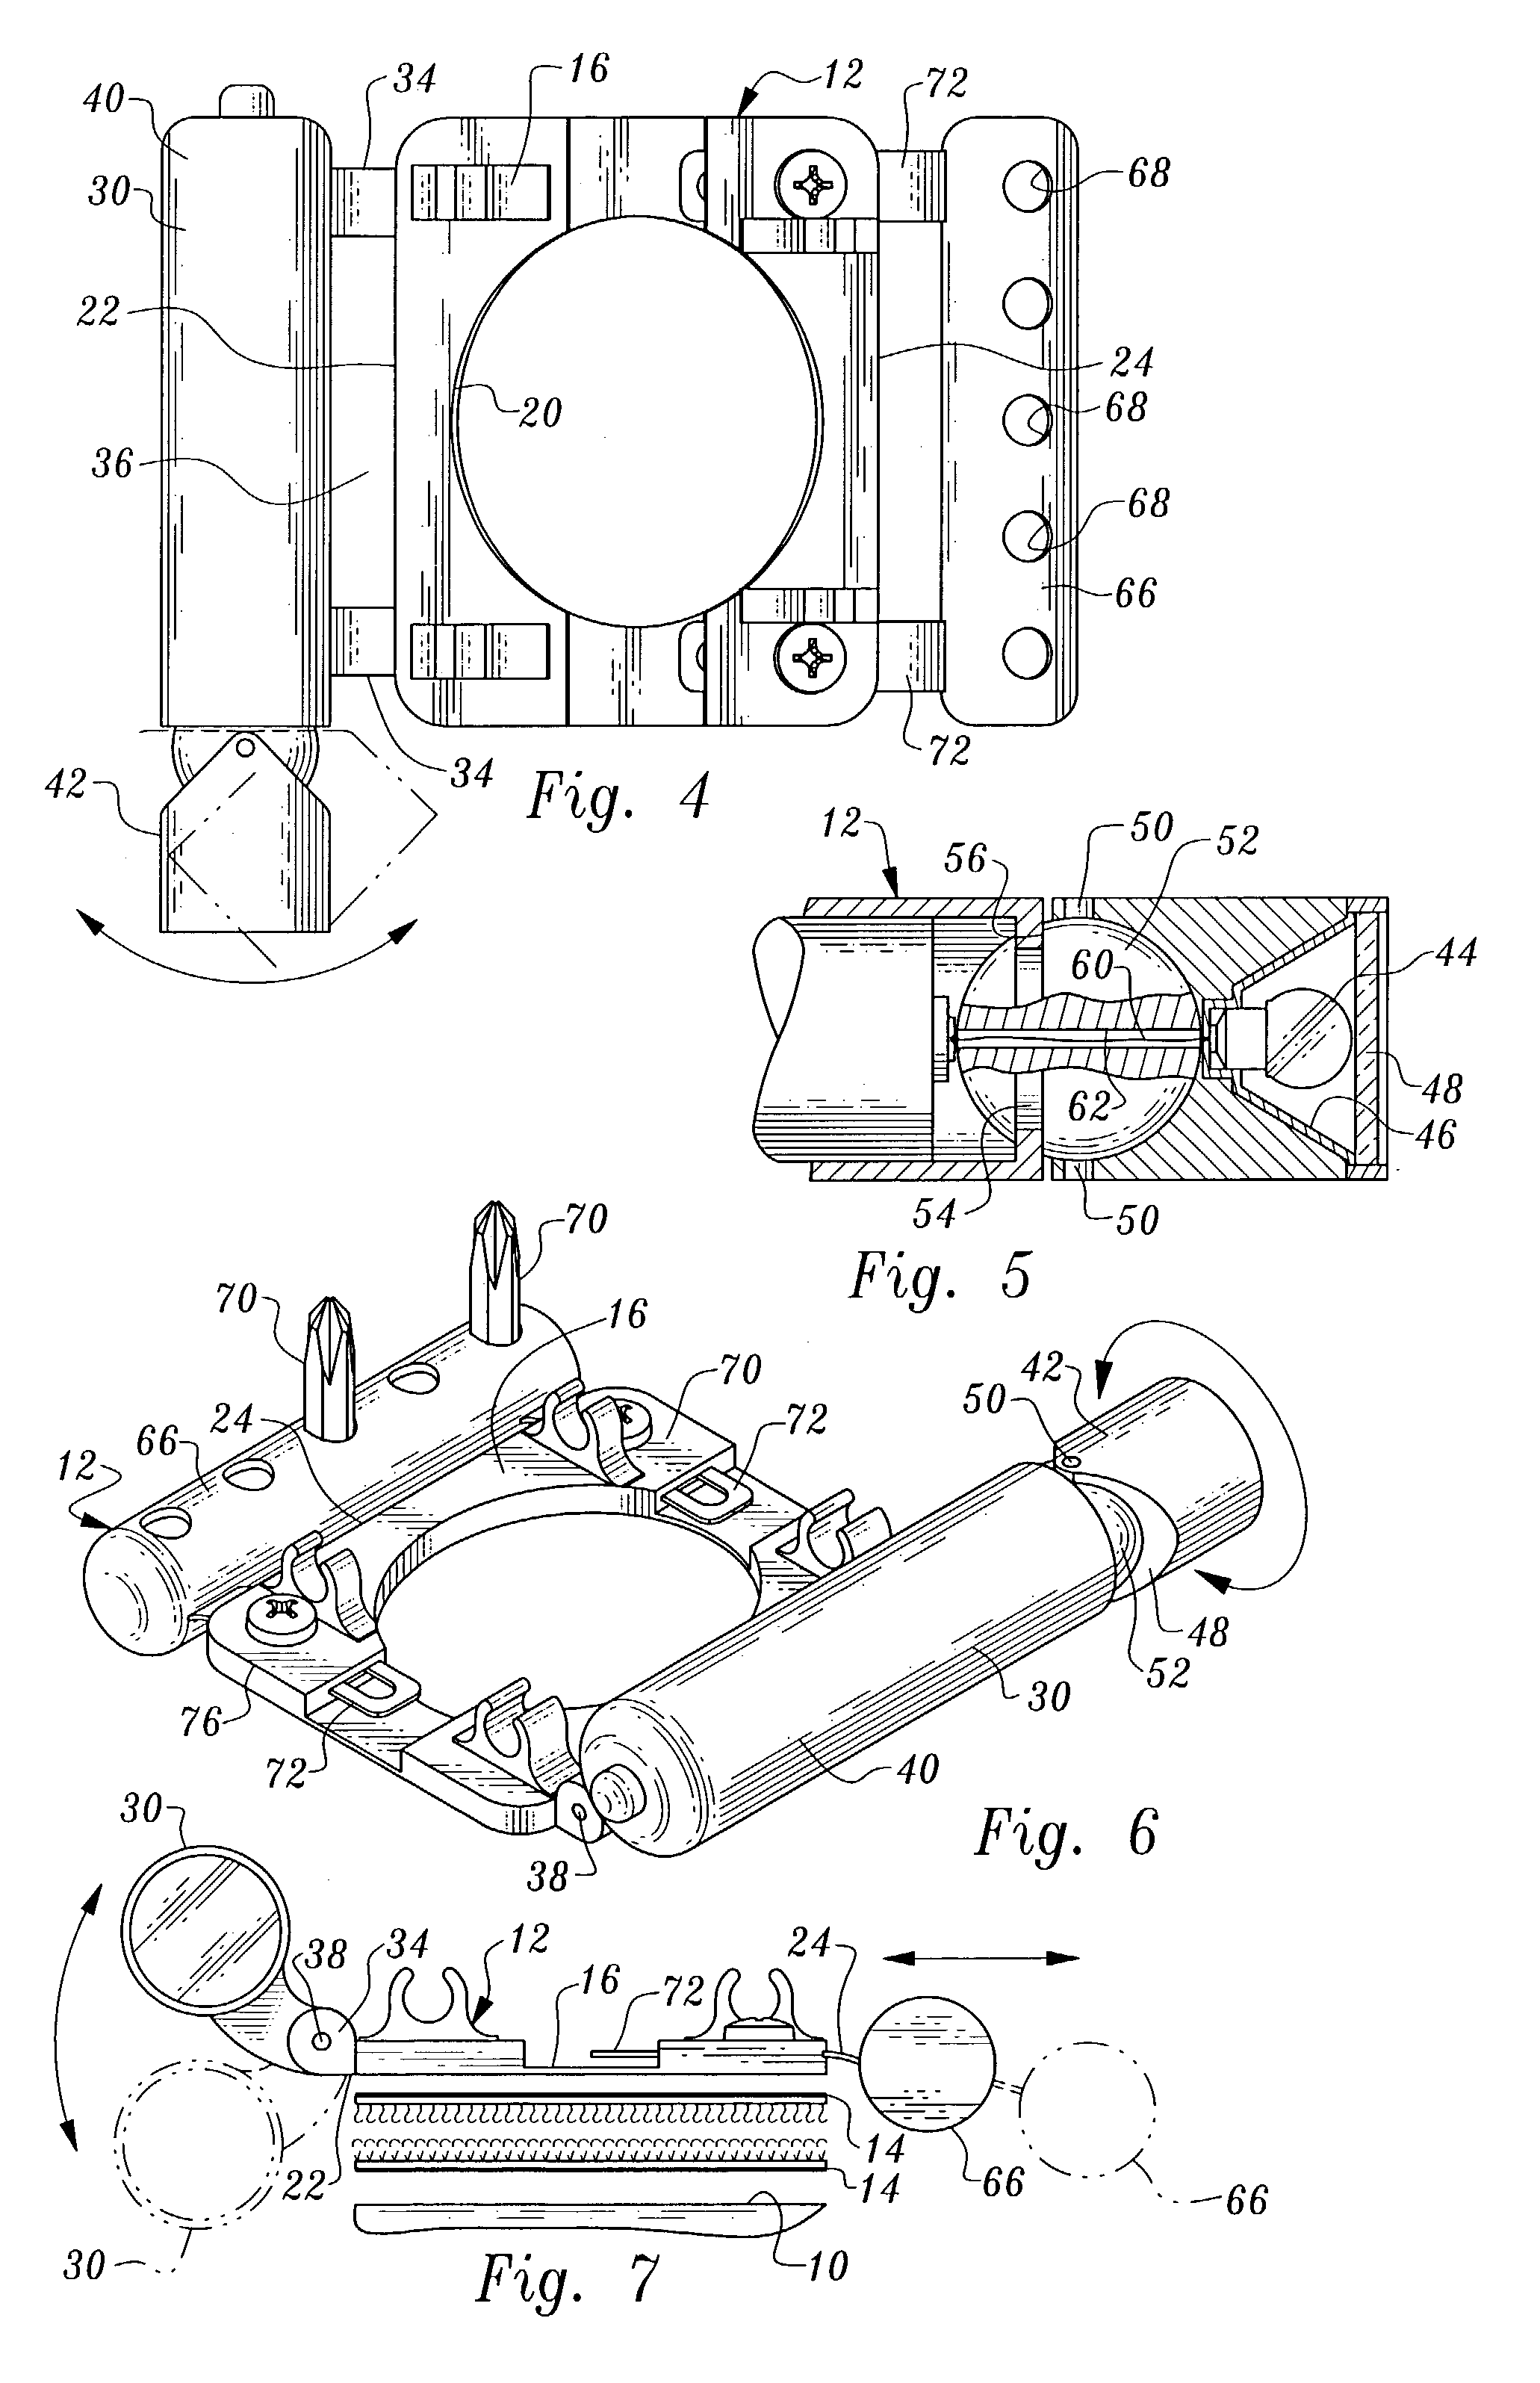 Apparatus including flash light and bit holder for attachment to an electric drill